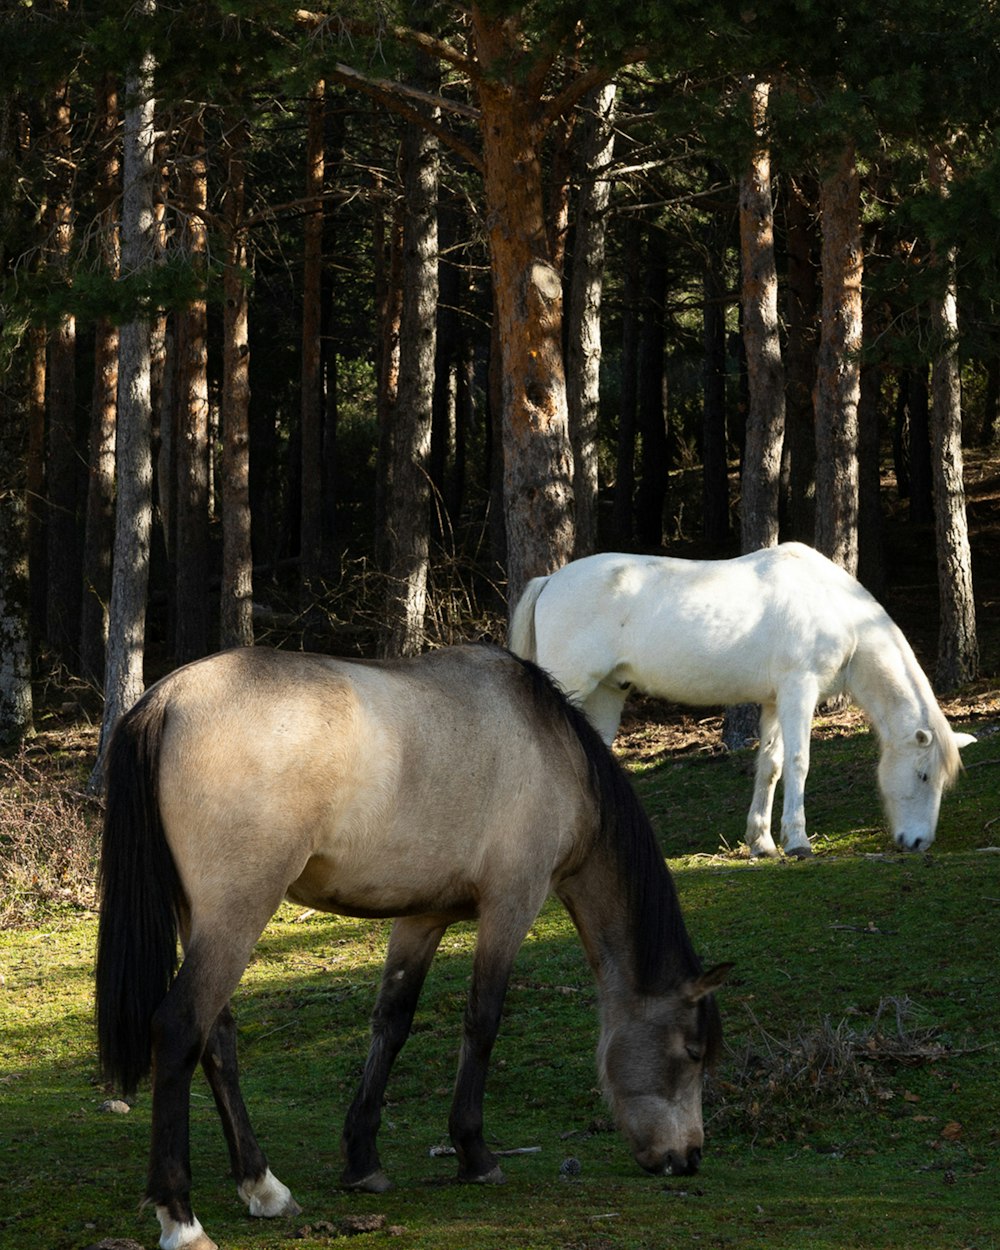 two horses are grazing in a grassy field